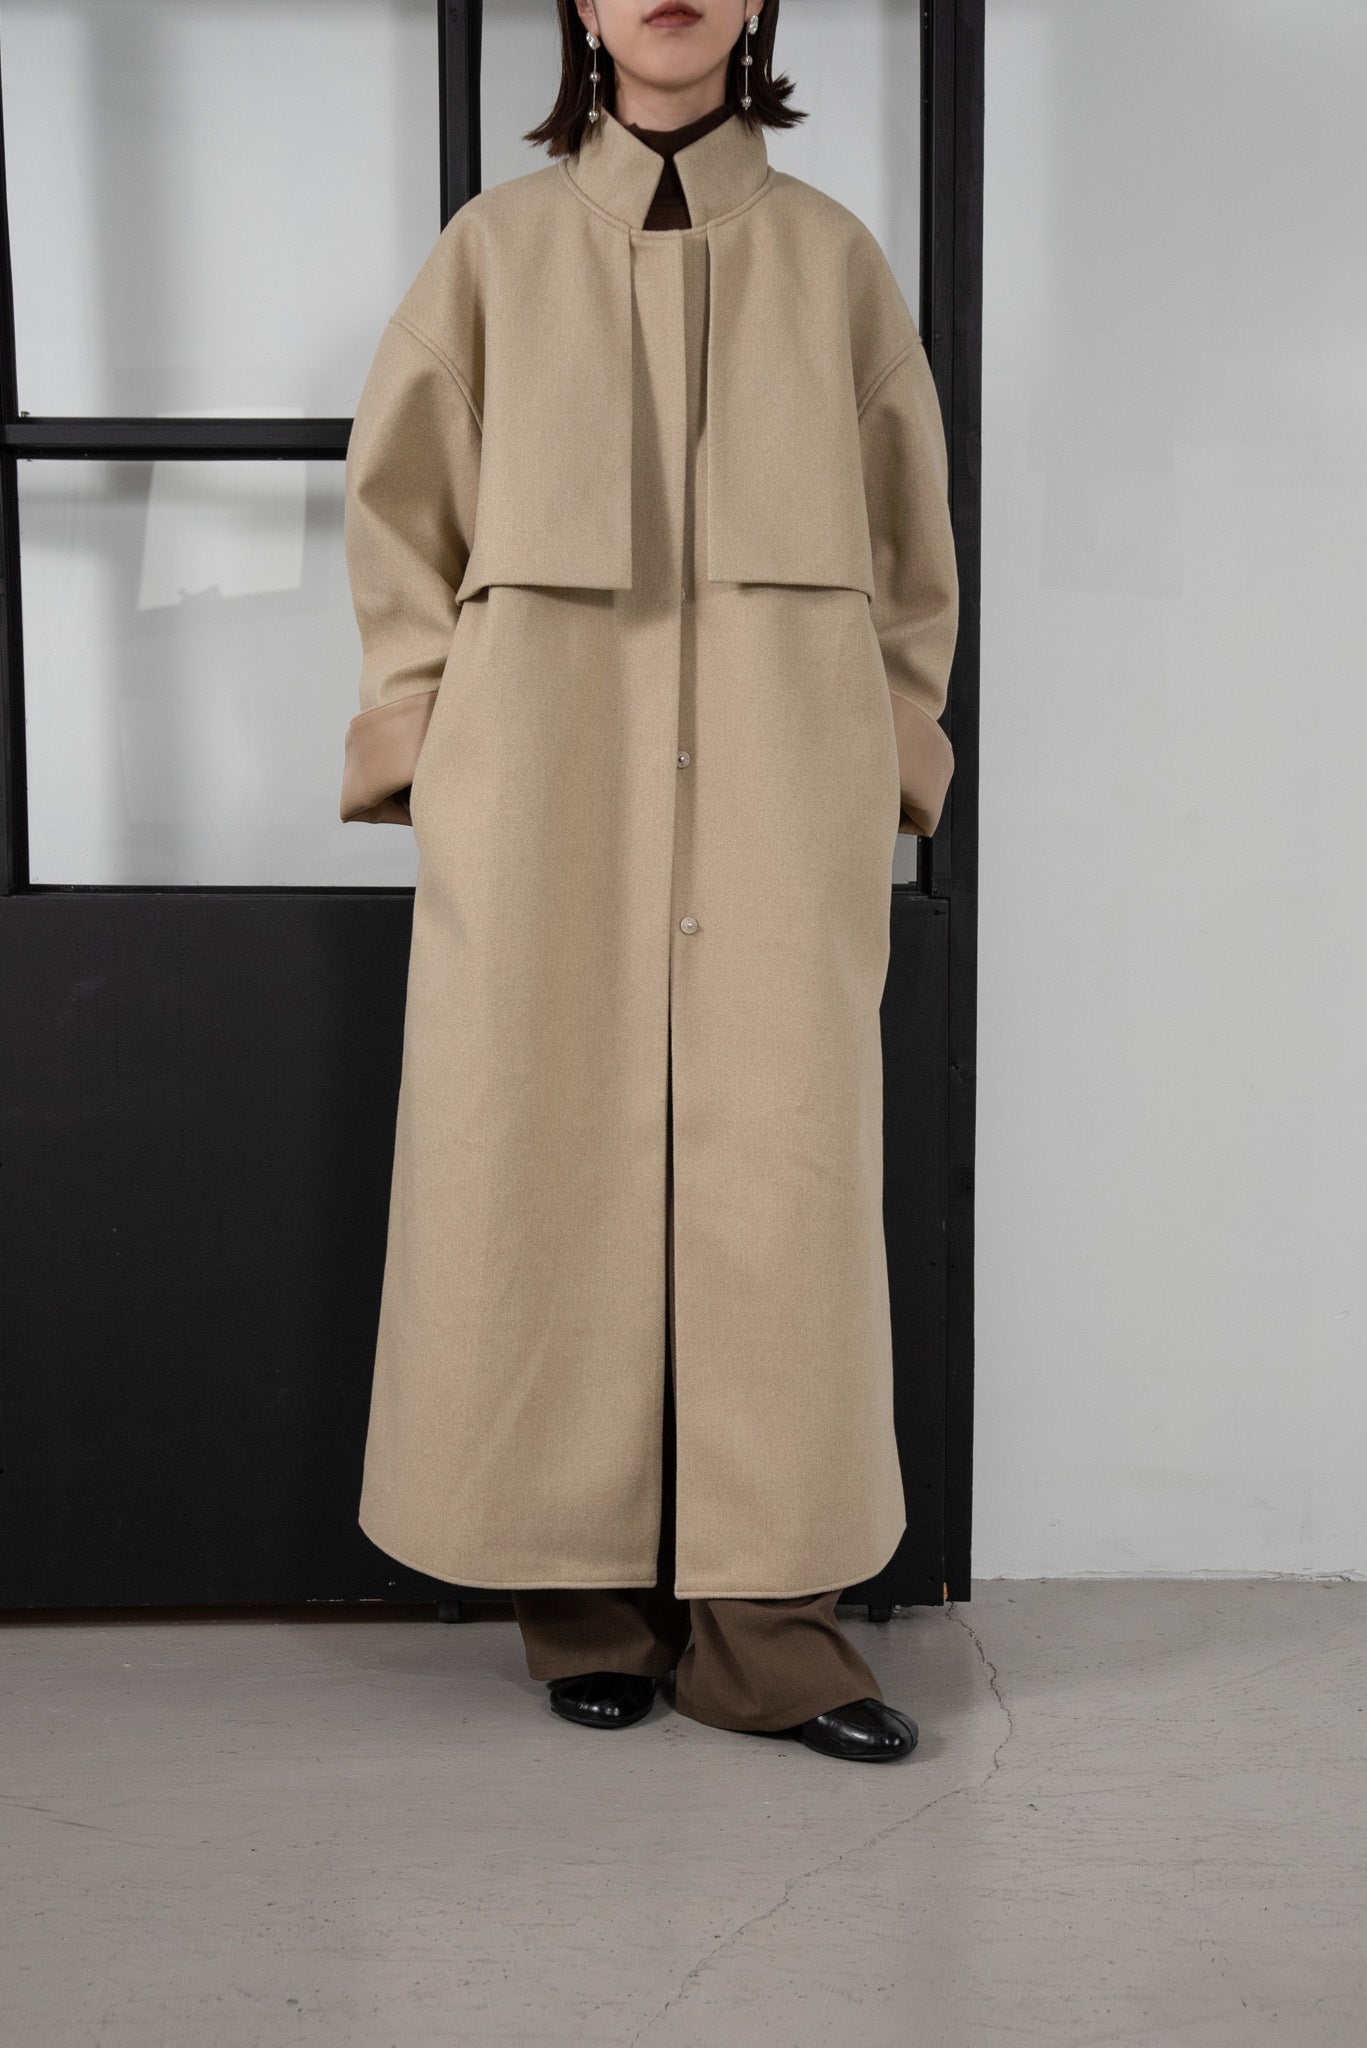 lawgy コート stand neck leather cuff coat | angeloawards.com